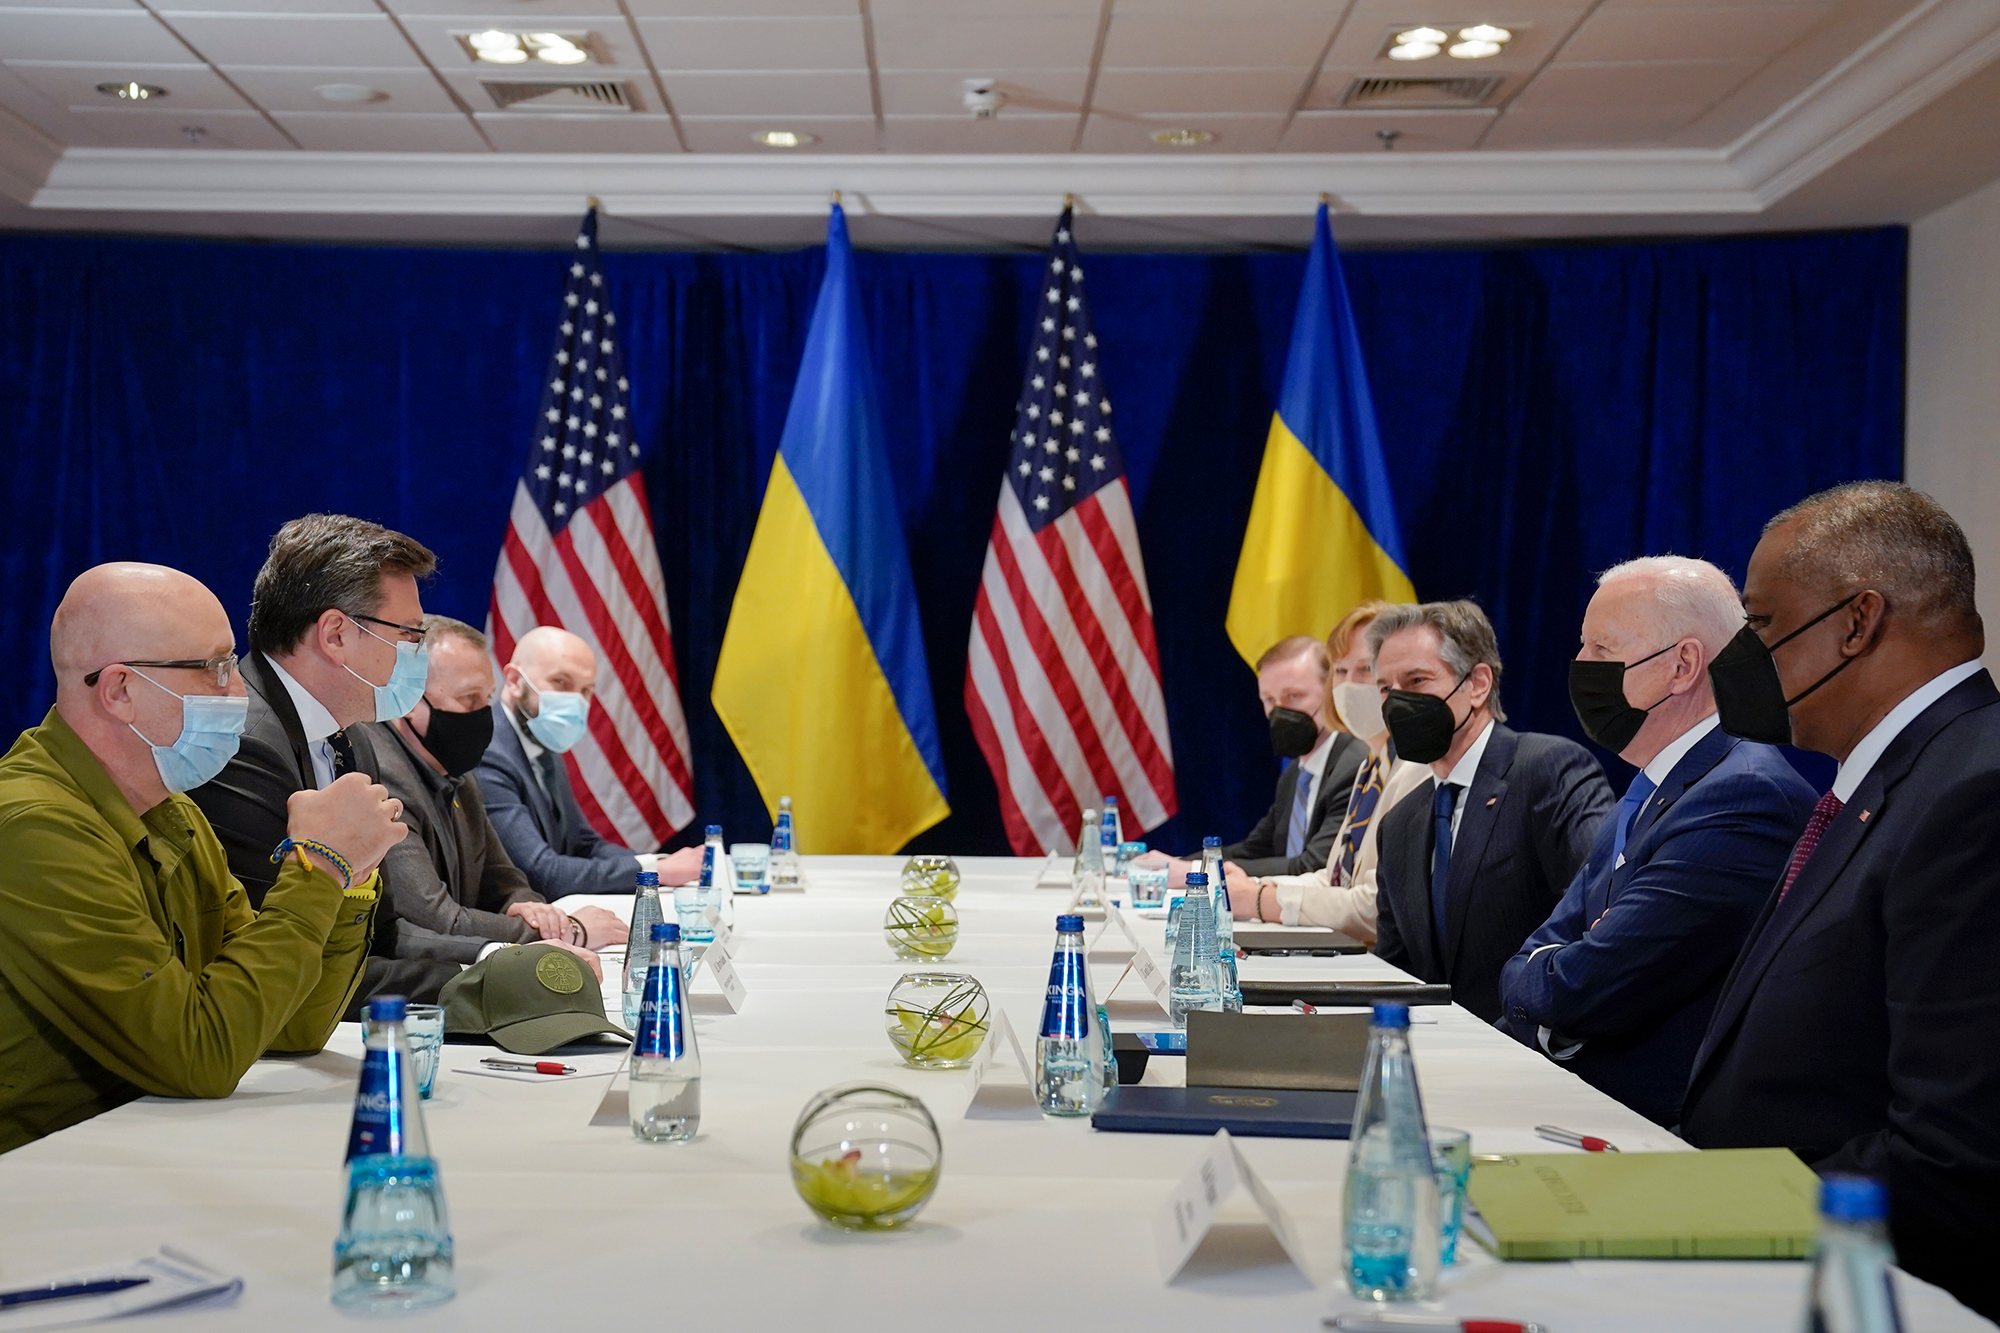 Ukrainian Foreign Minister Dmytro Kuleba, second from left, meets with US President Biden in Warsaw, Poland on March 26.